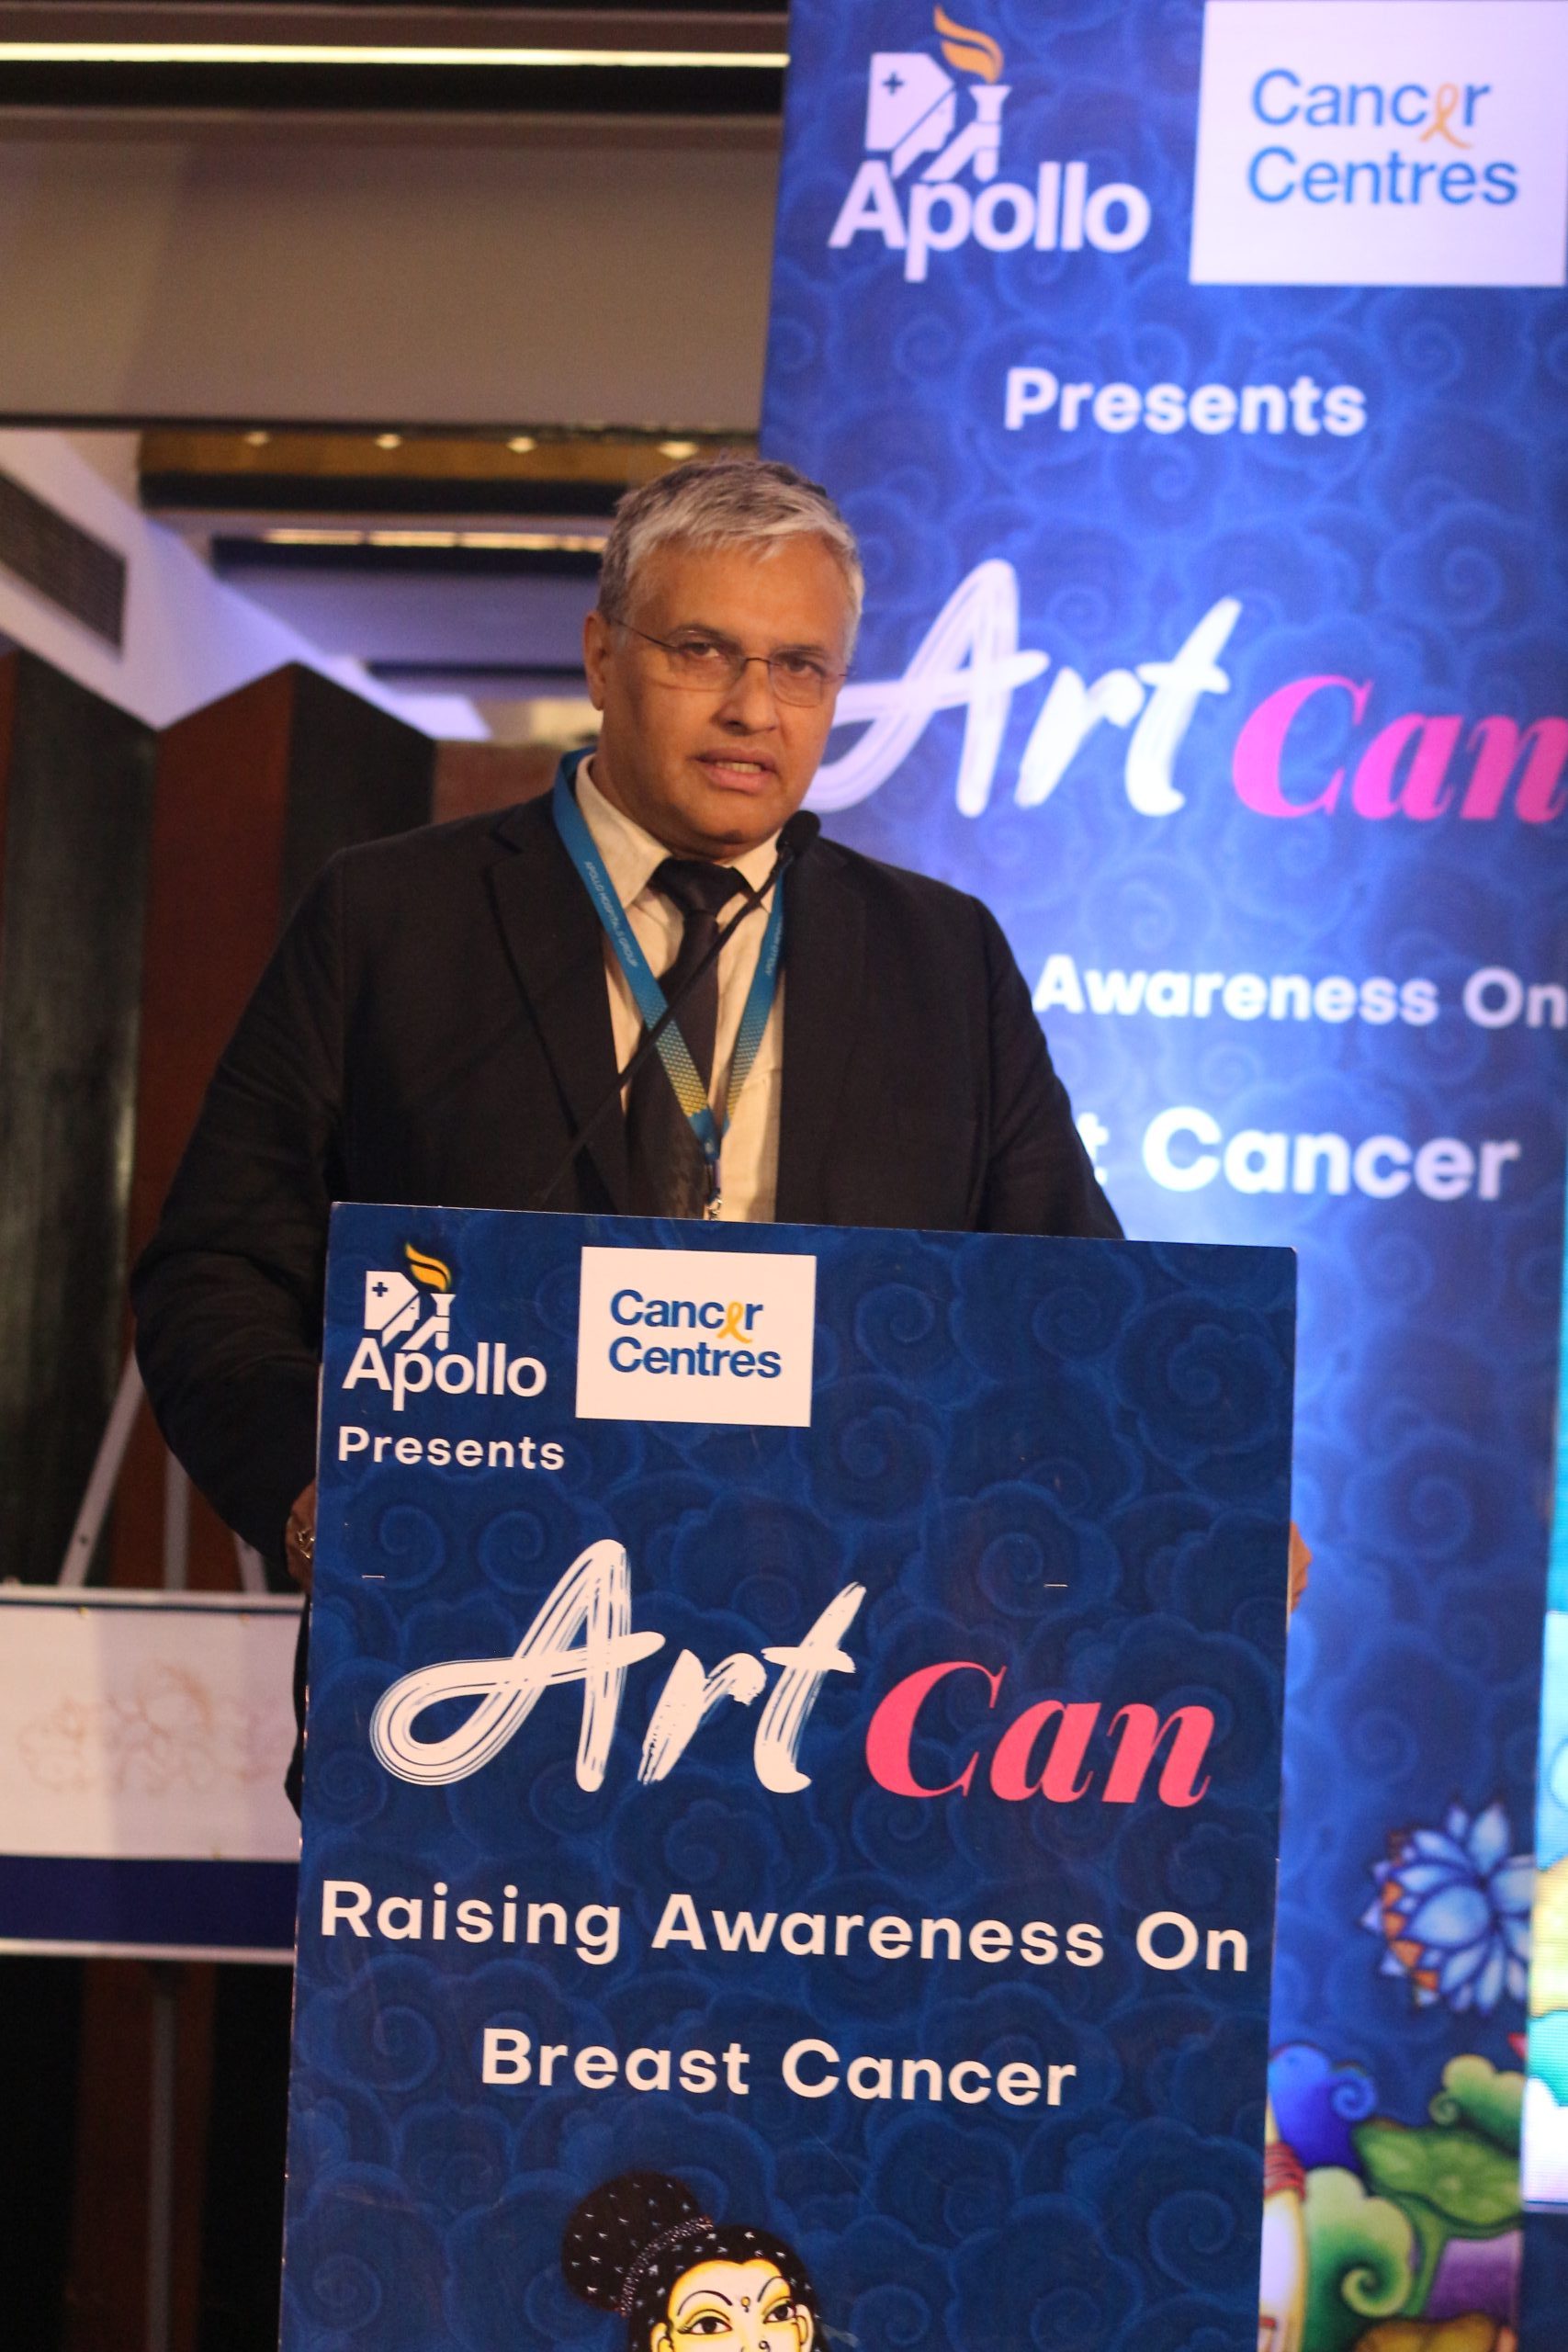 Apollo Cancer Centres launches "ArtCan" to raise awareness about Breast Cancer